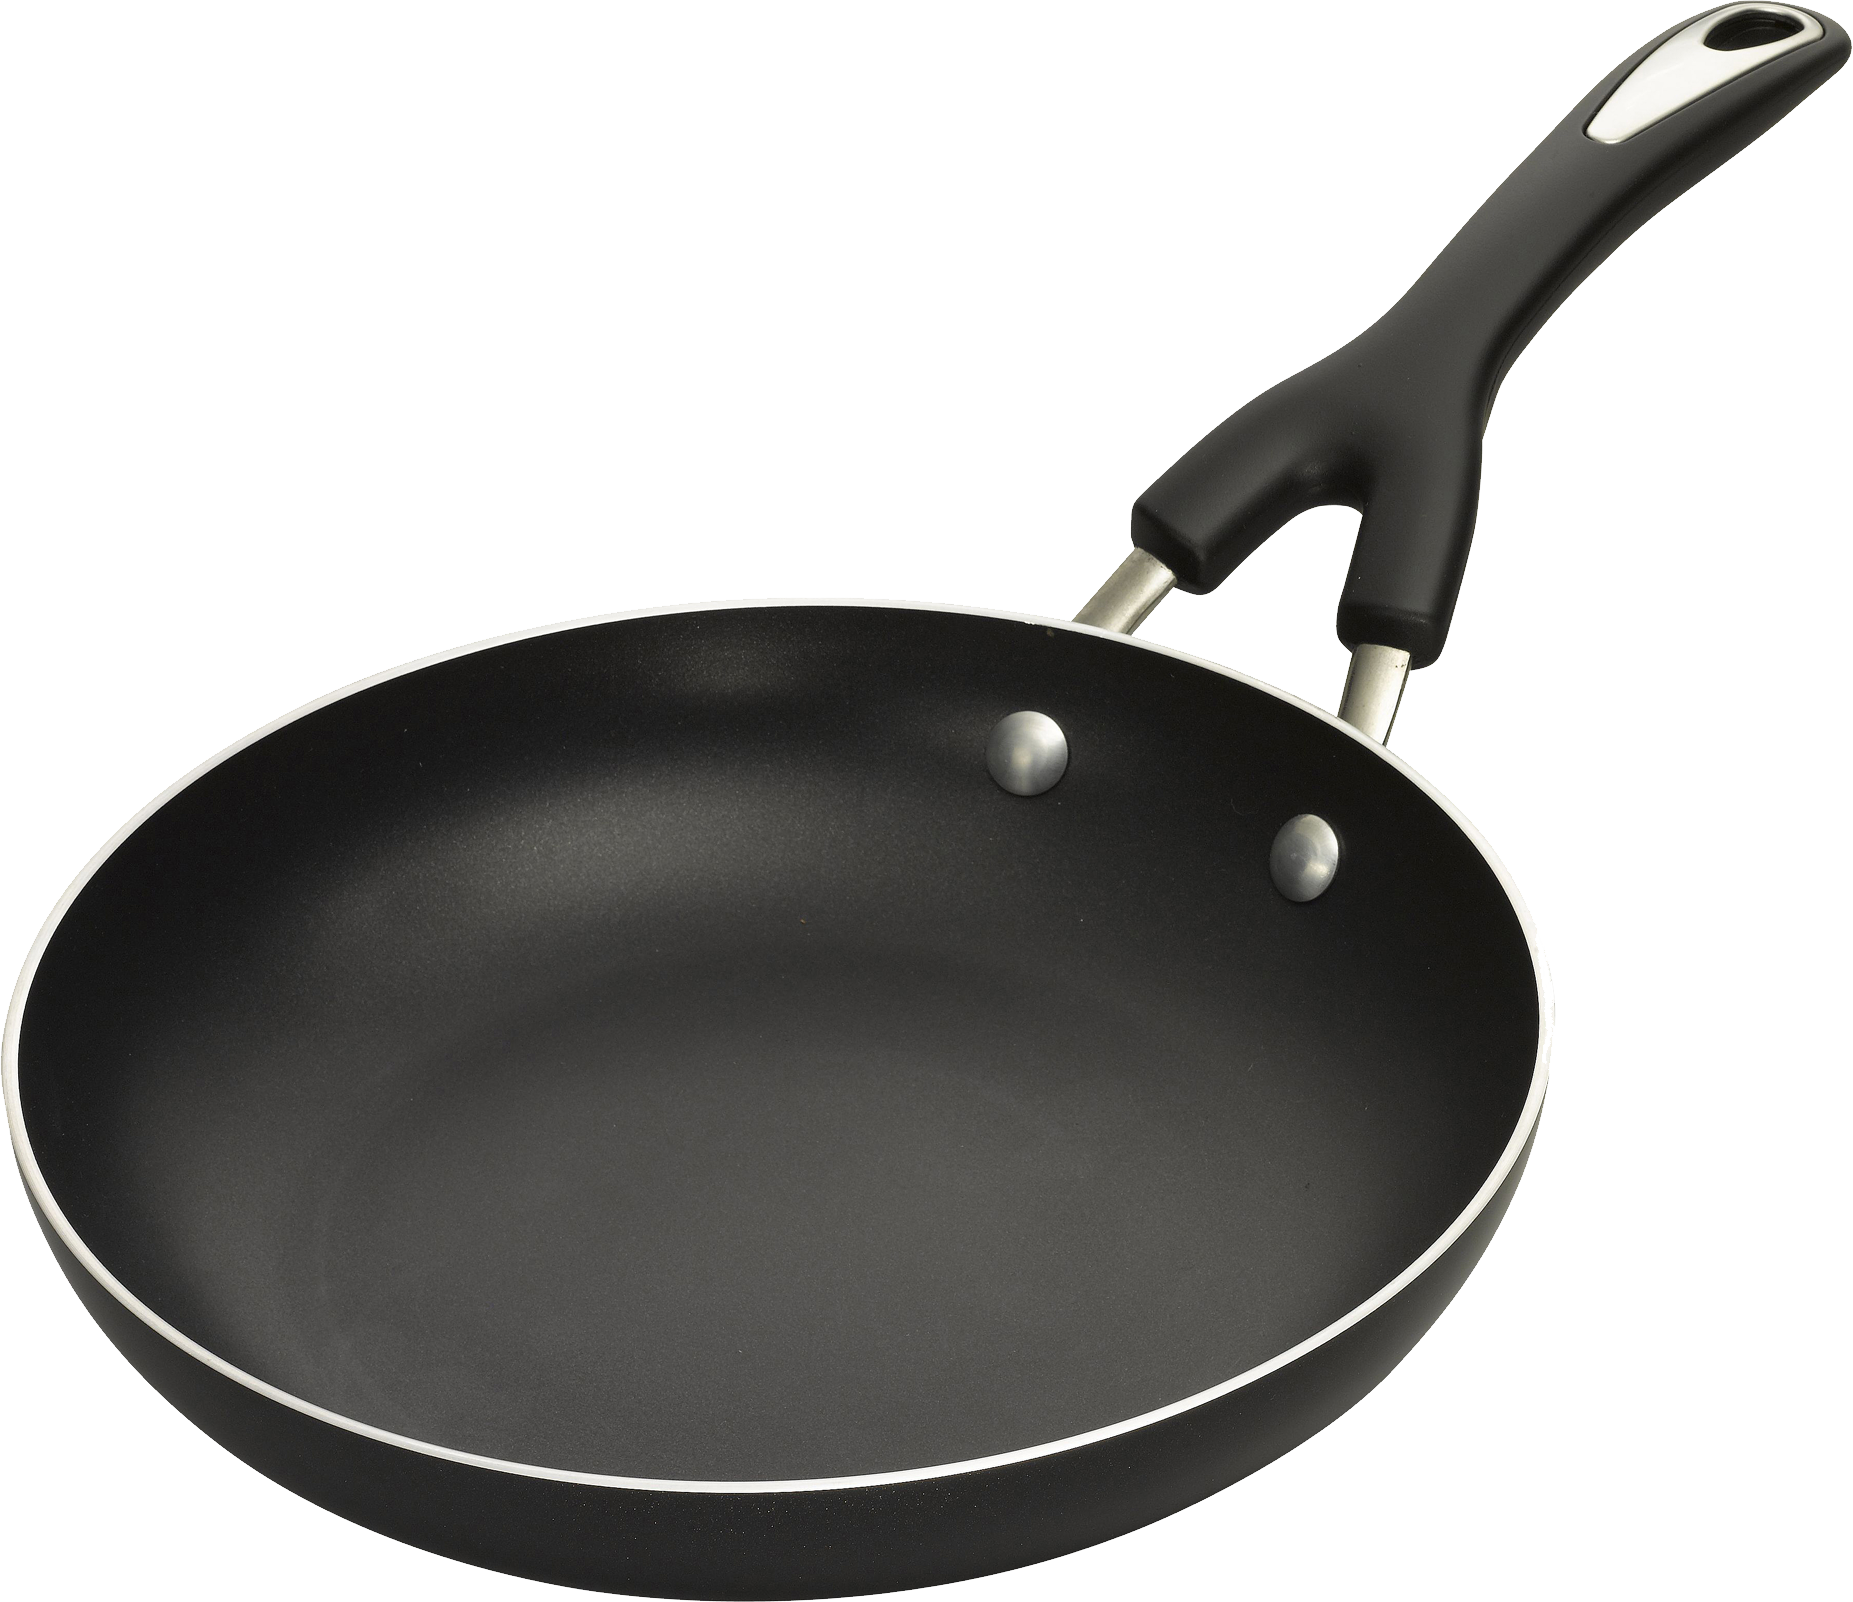 Frying Pans Png image #43337